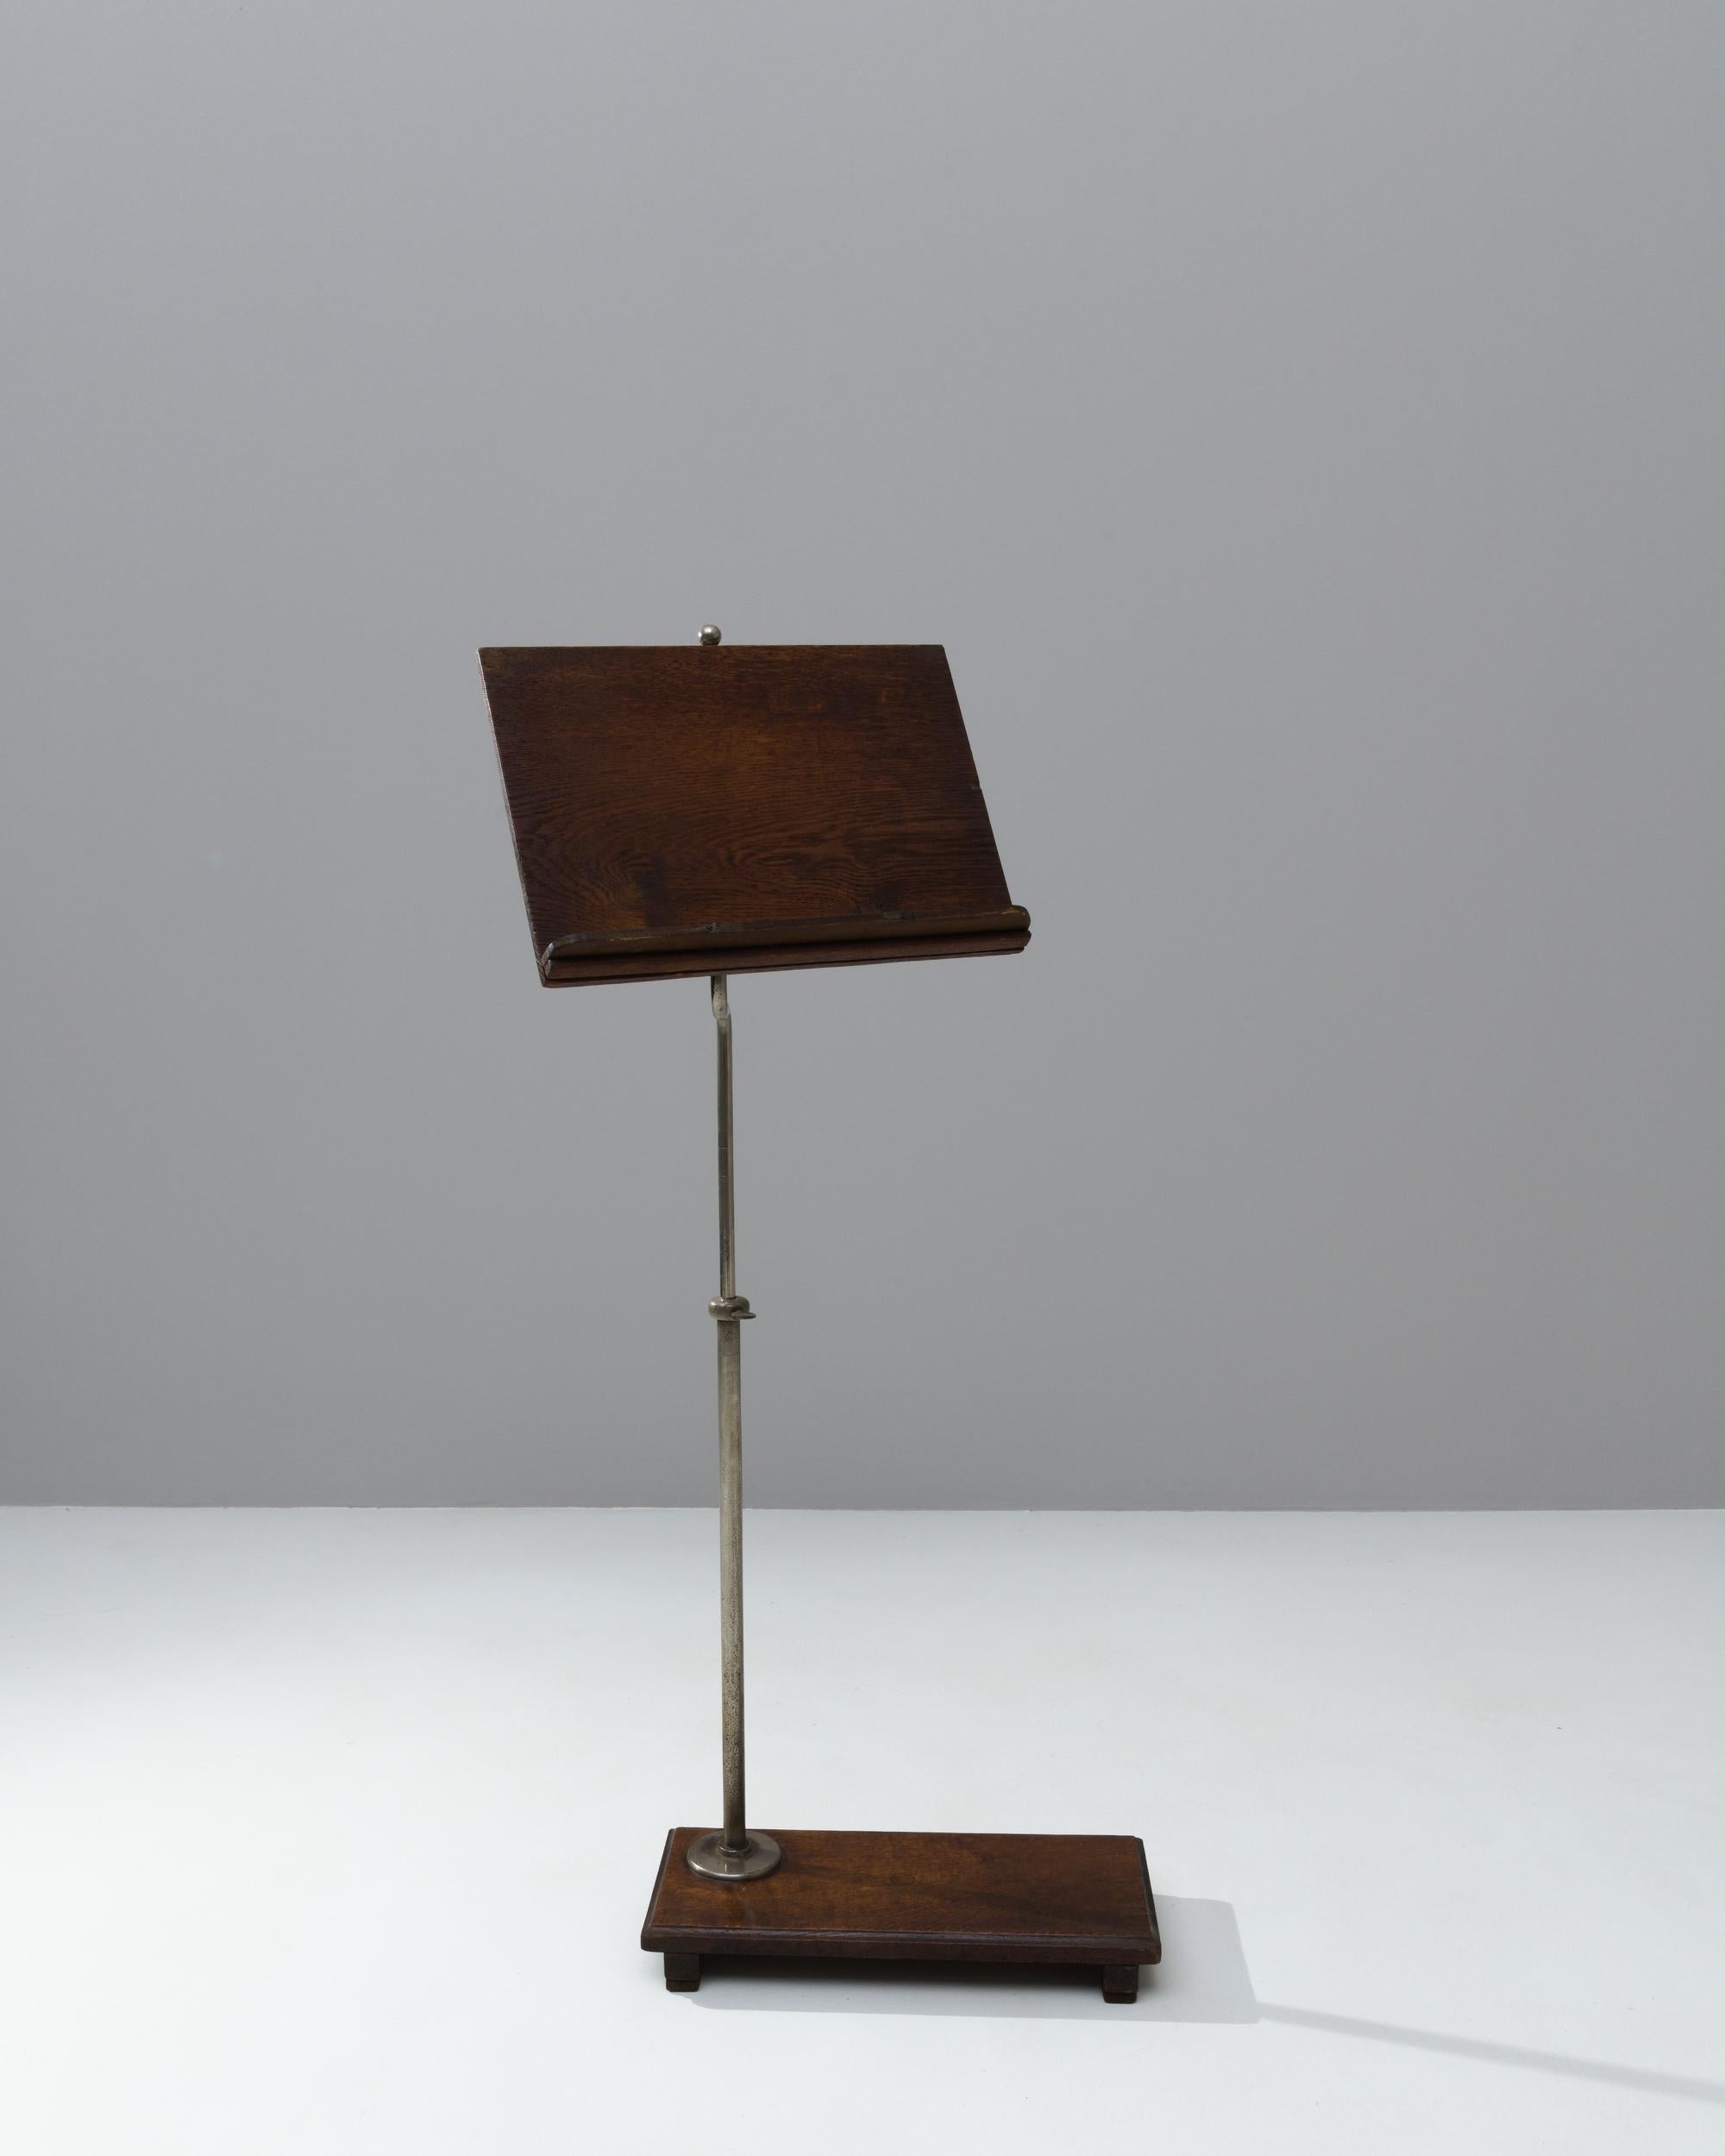 A wooden music stand made in the United Kingdom circa 1900. Sleek yet homey, this wooden and metal music stand radiates a classical beauty. With a swiveling, adjustable stand and a sturdy wooden base, this musical accessory offers both style and